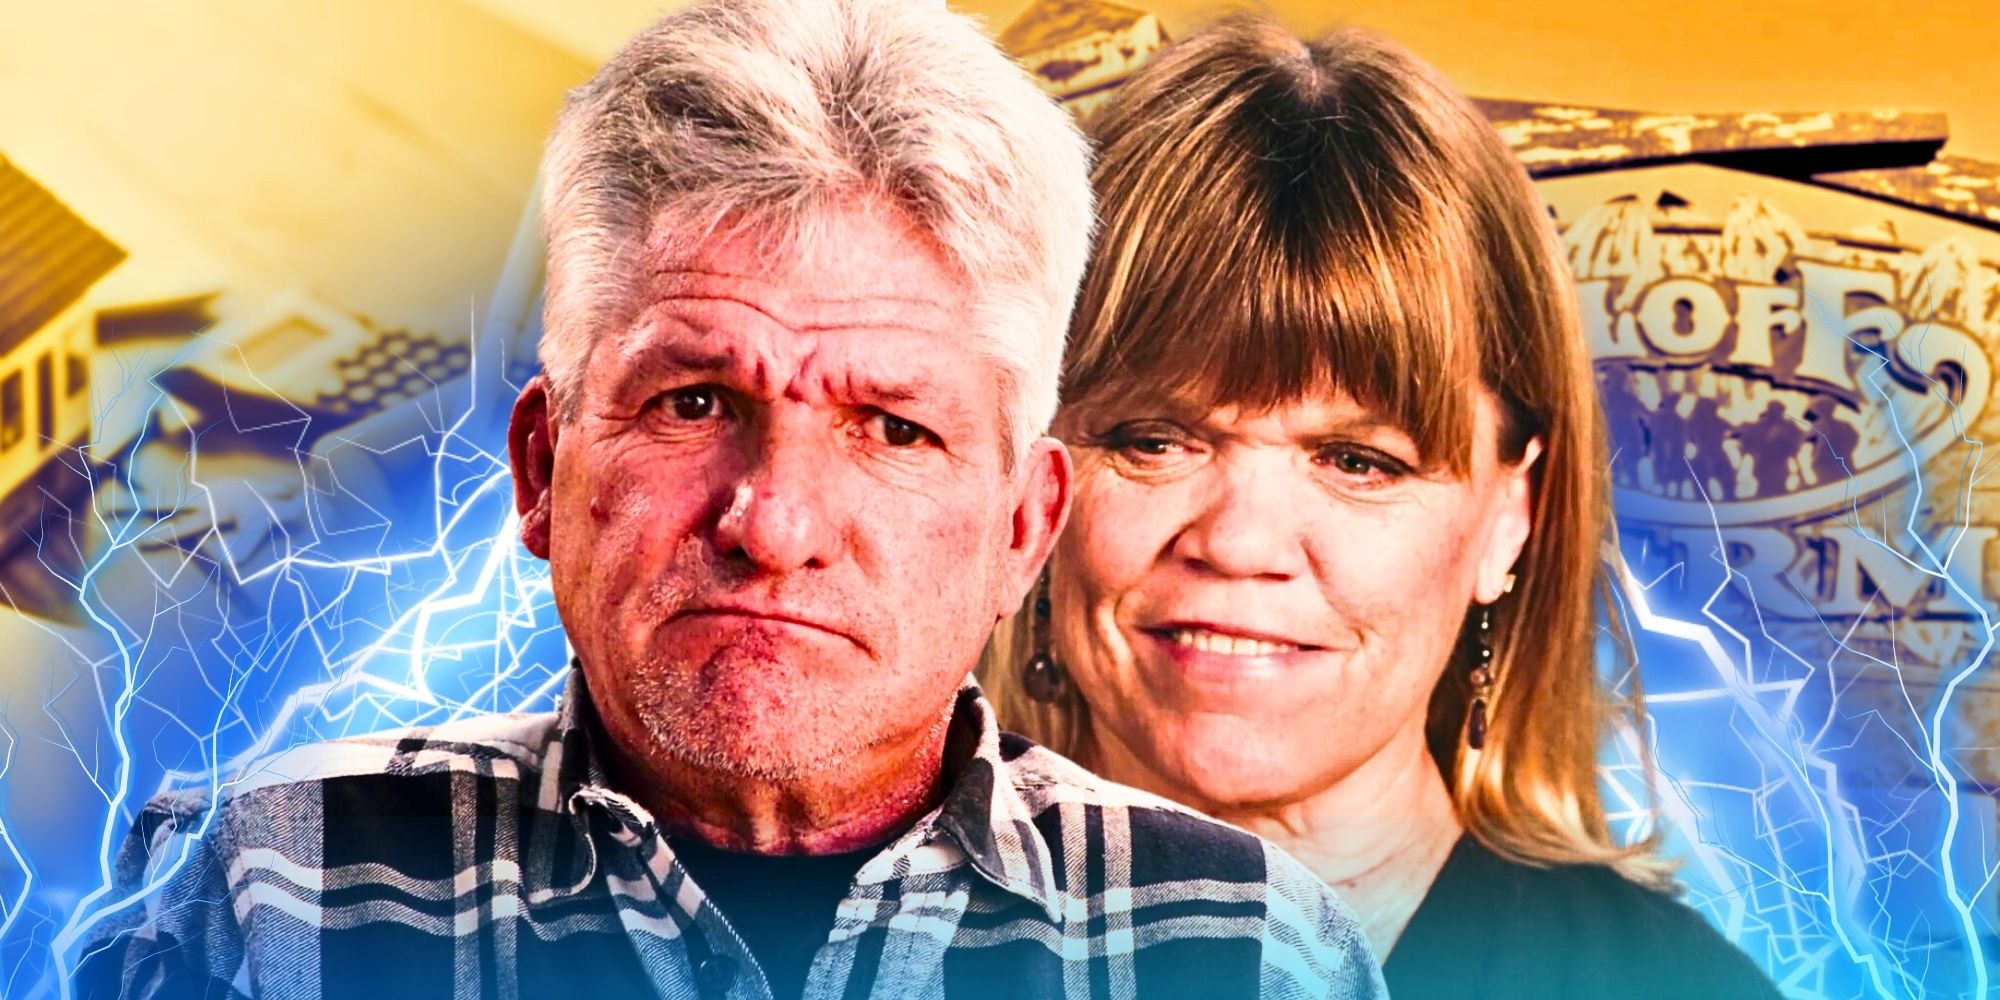 Little People, Big World's Matt and Amy Roloff, with the Roloff Farm sign behind them